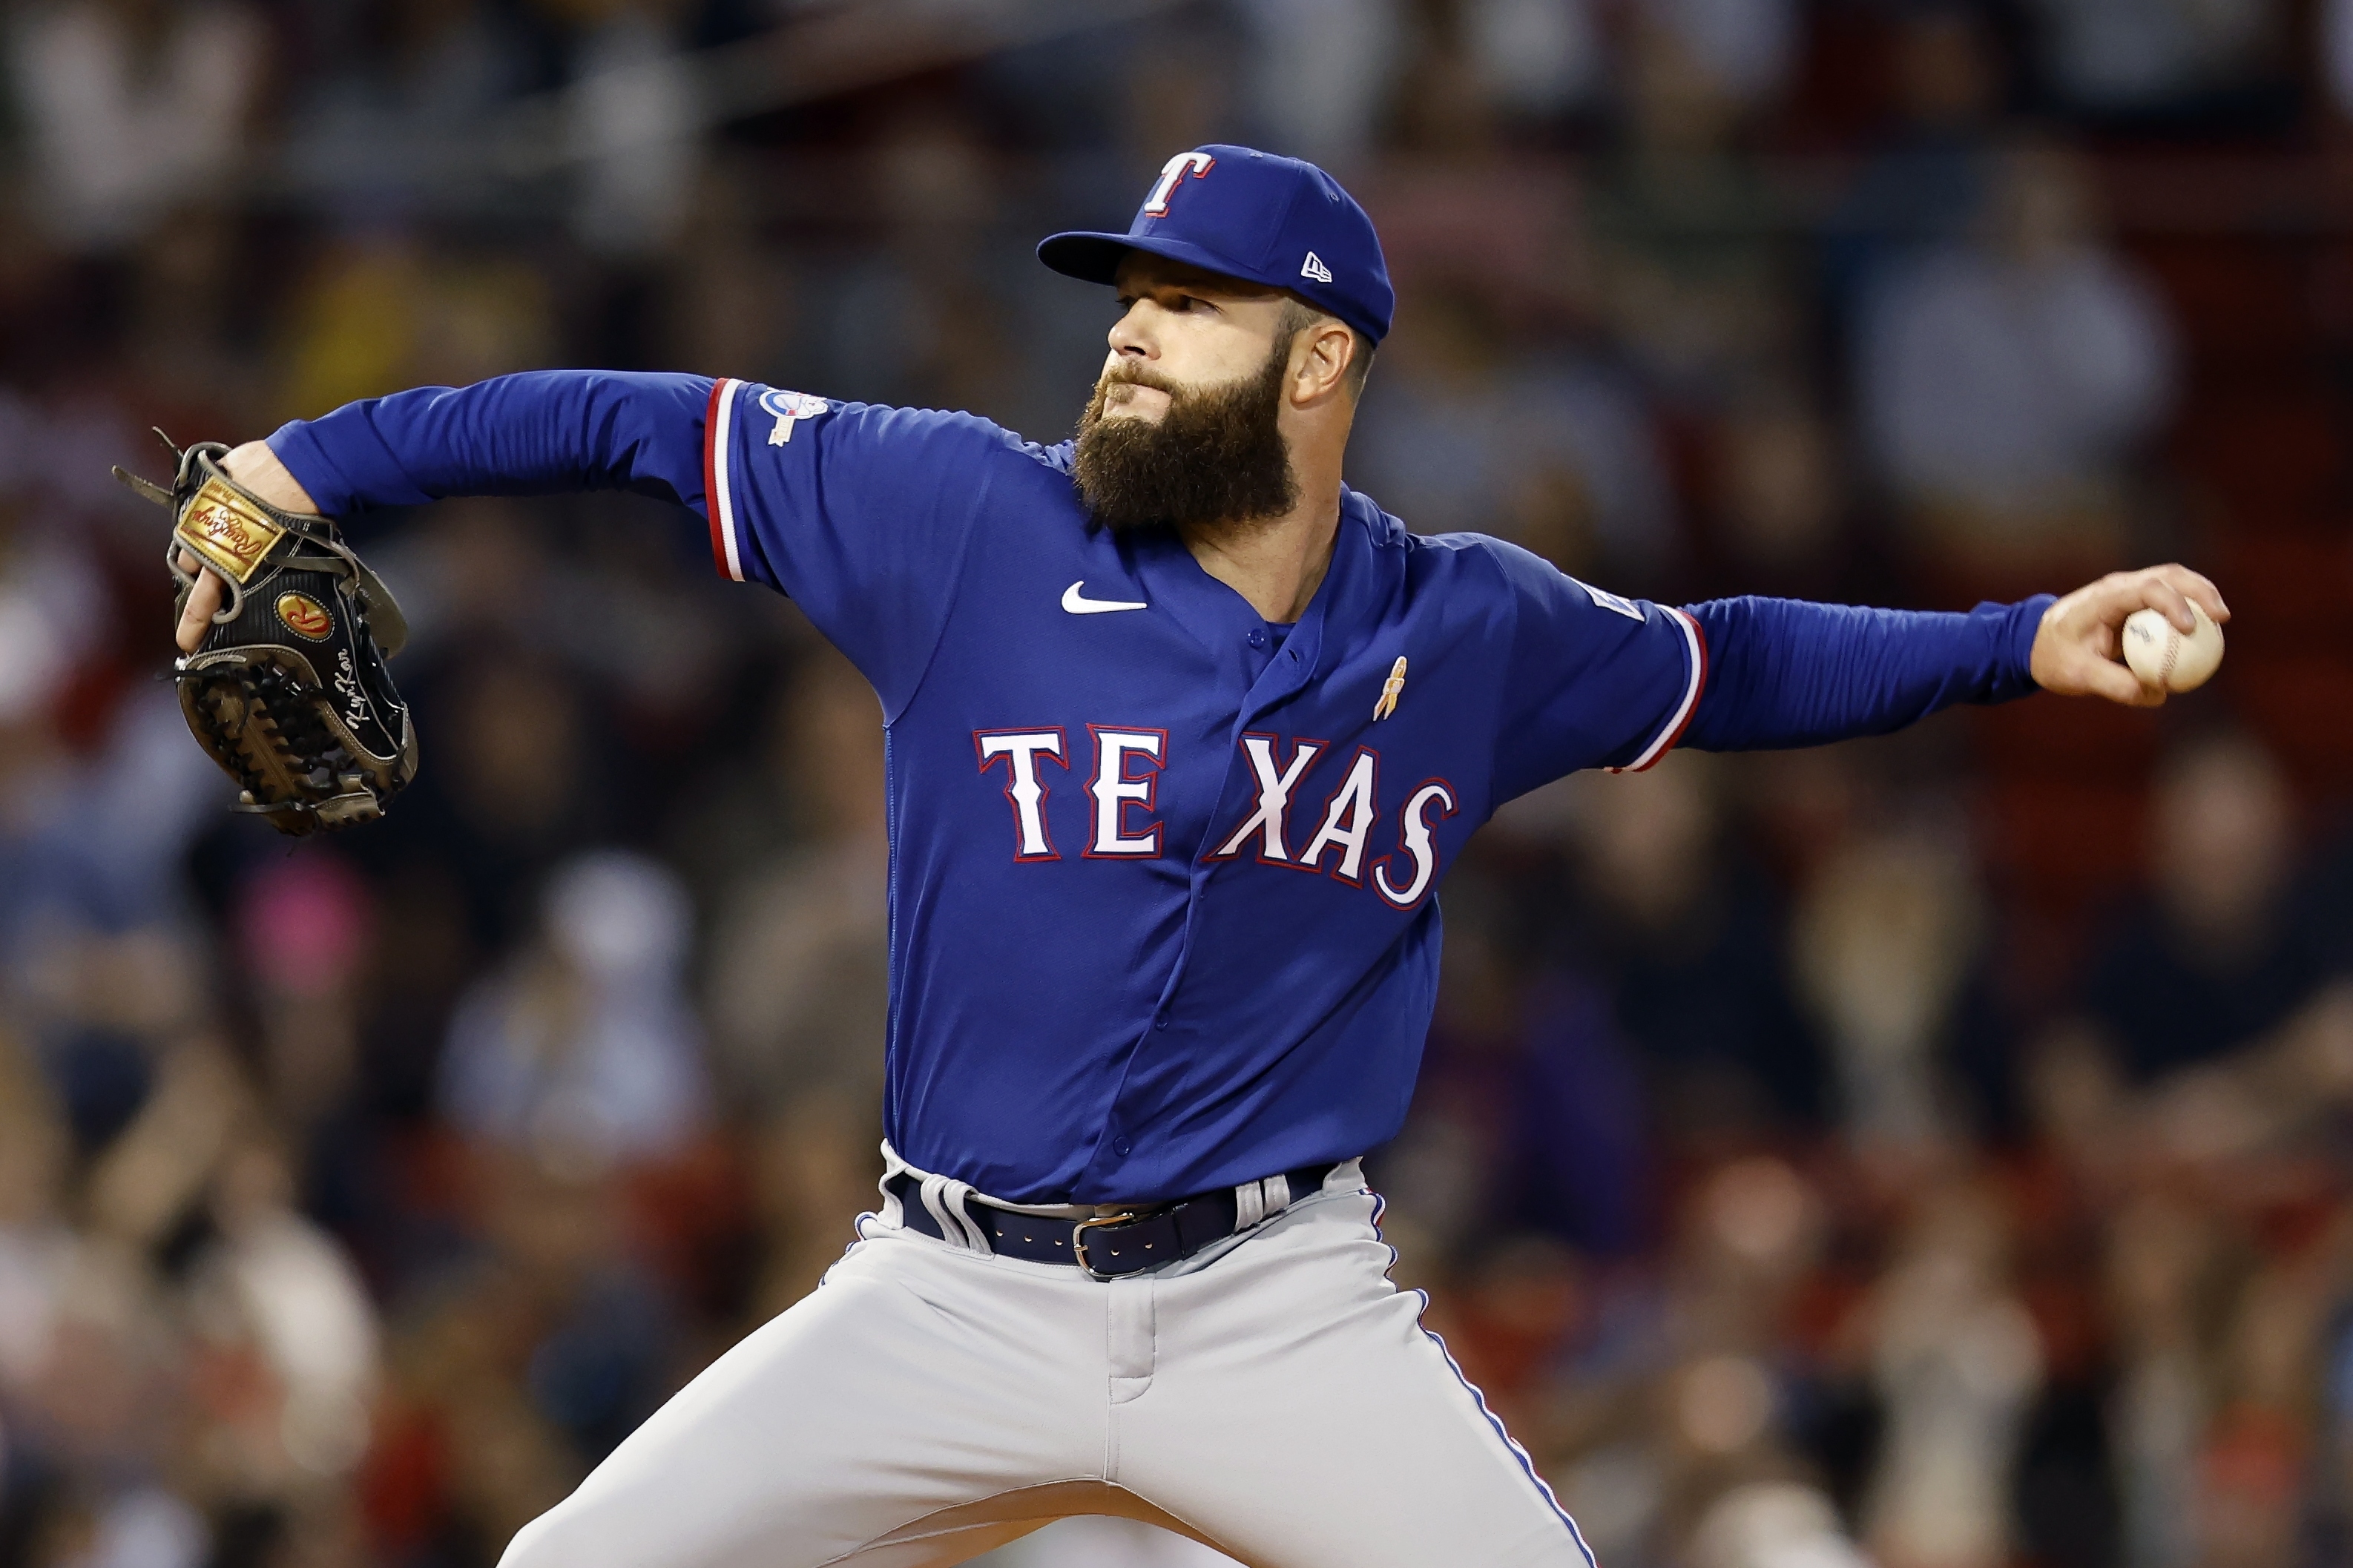 Dallas Keuchel, with a big assist from mom, gives the White Sox